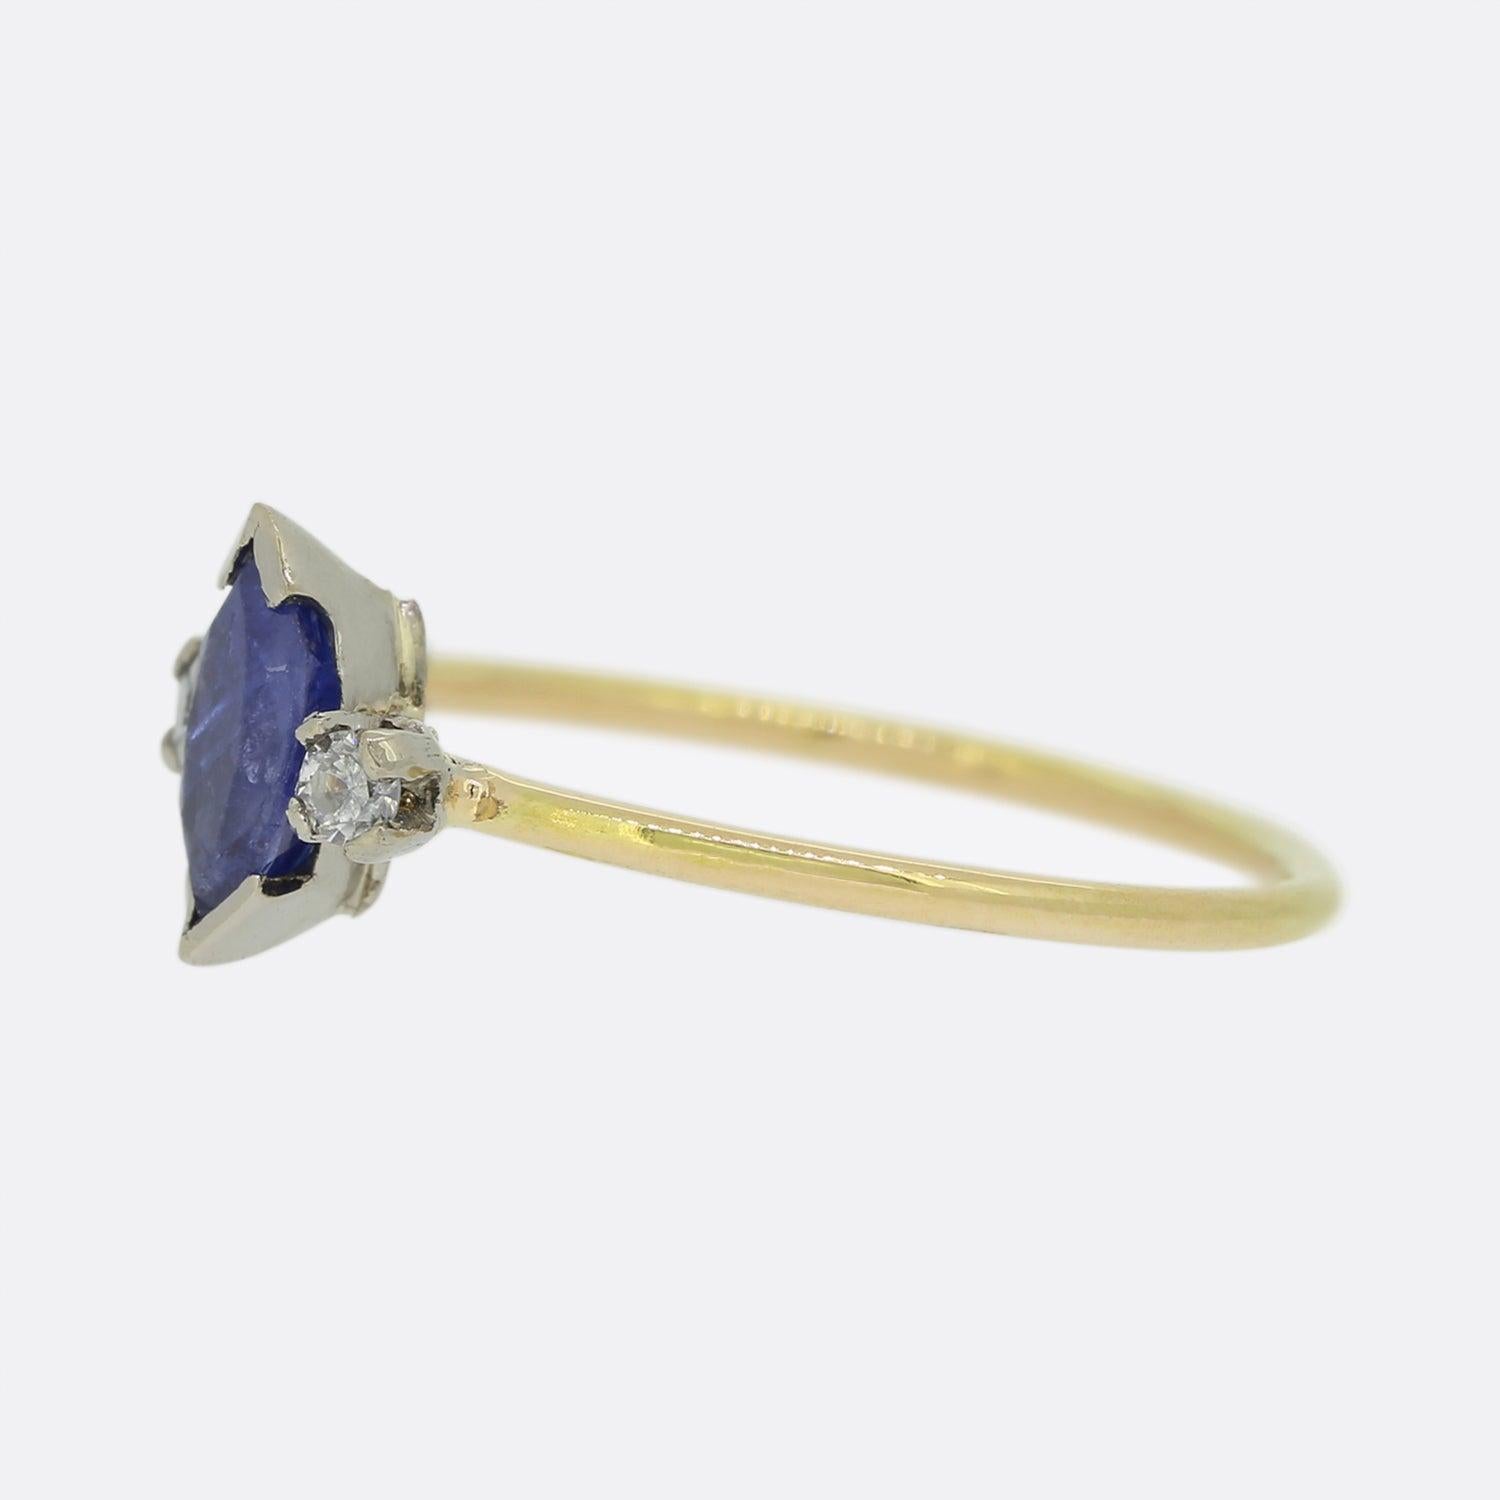 Here we have a lovely sapphire and diamond three stone ring. The focal marquise shaped sapphire sits bezel set at the centre of the piece and is flanked on either side by a single round shaped diamond; one white and one blue.

This piece started